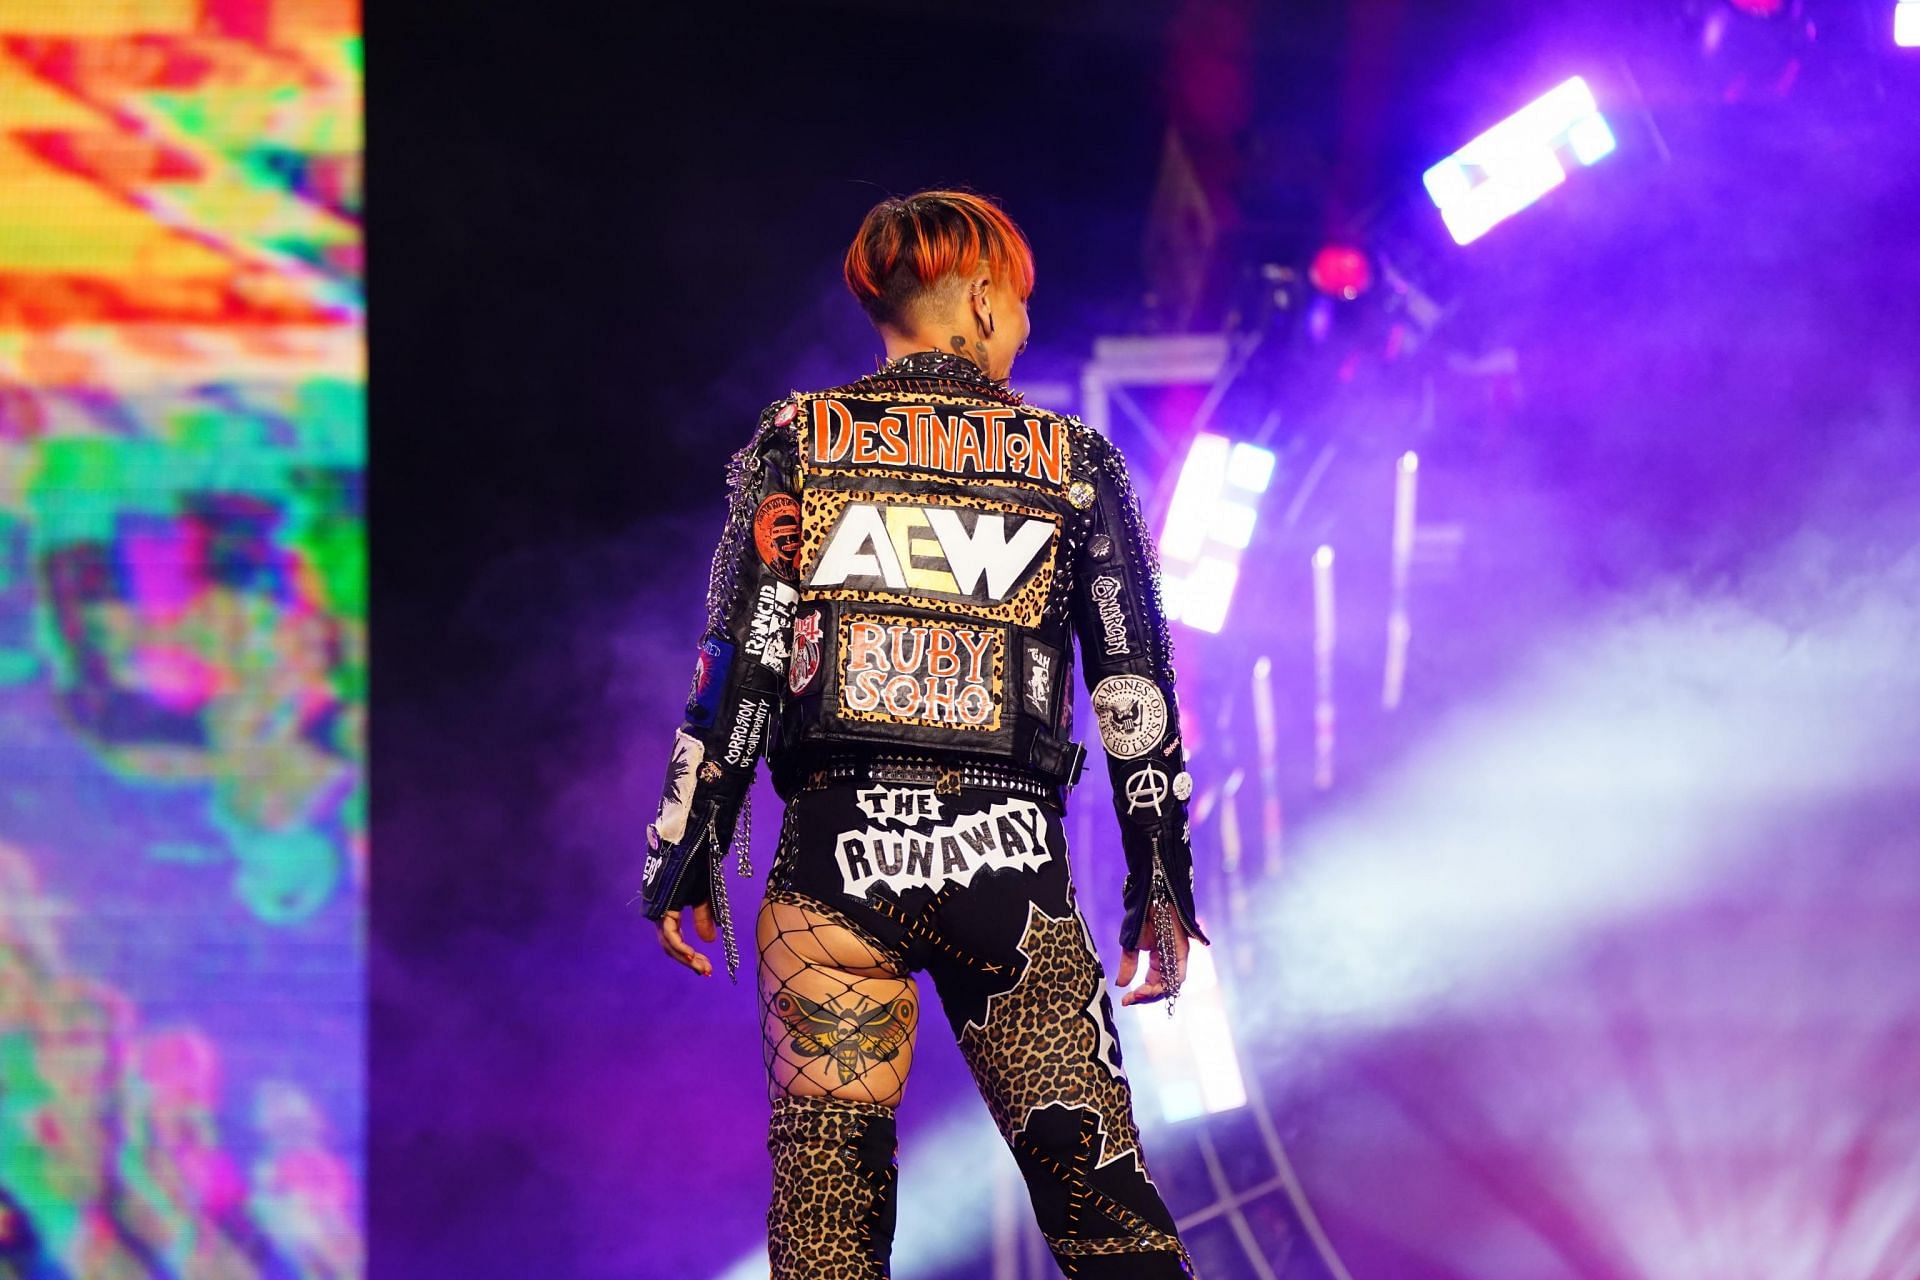 Ruby Soho made her AEW debut at All Out in September.